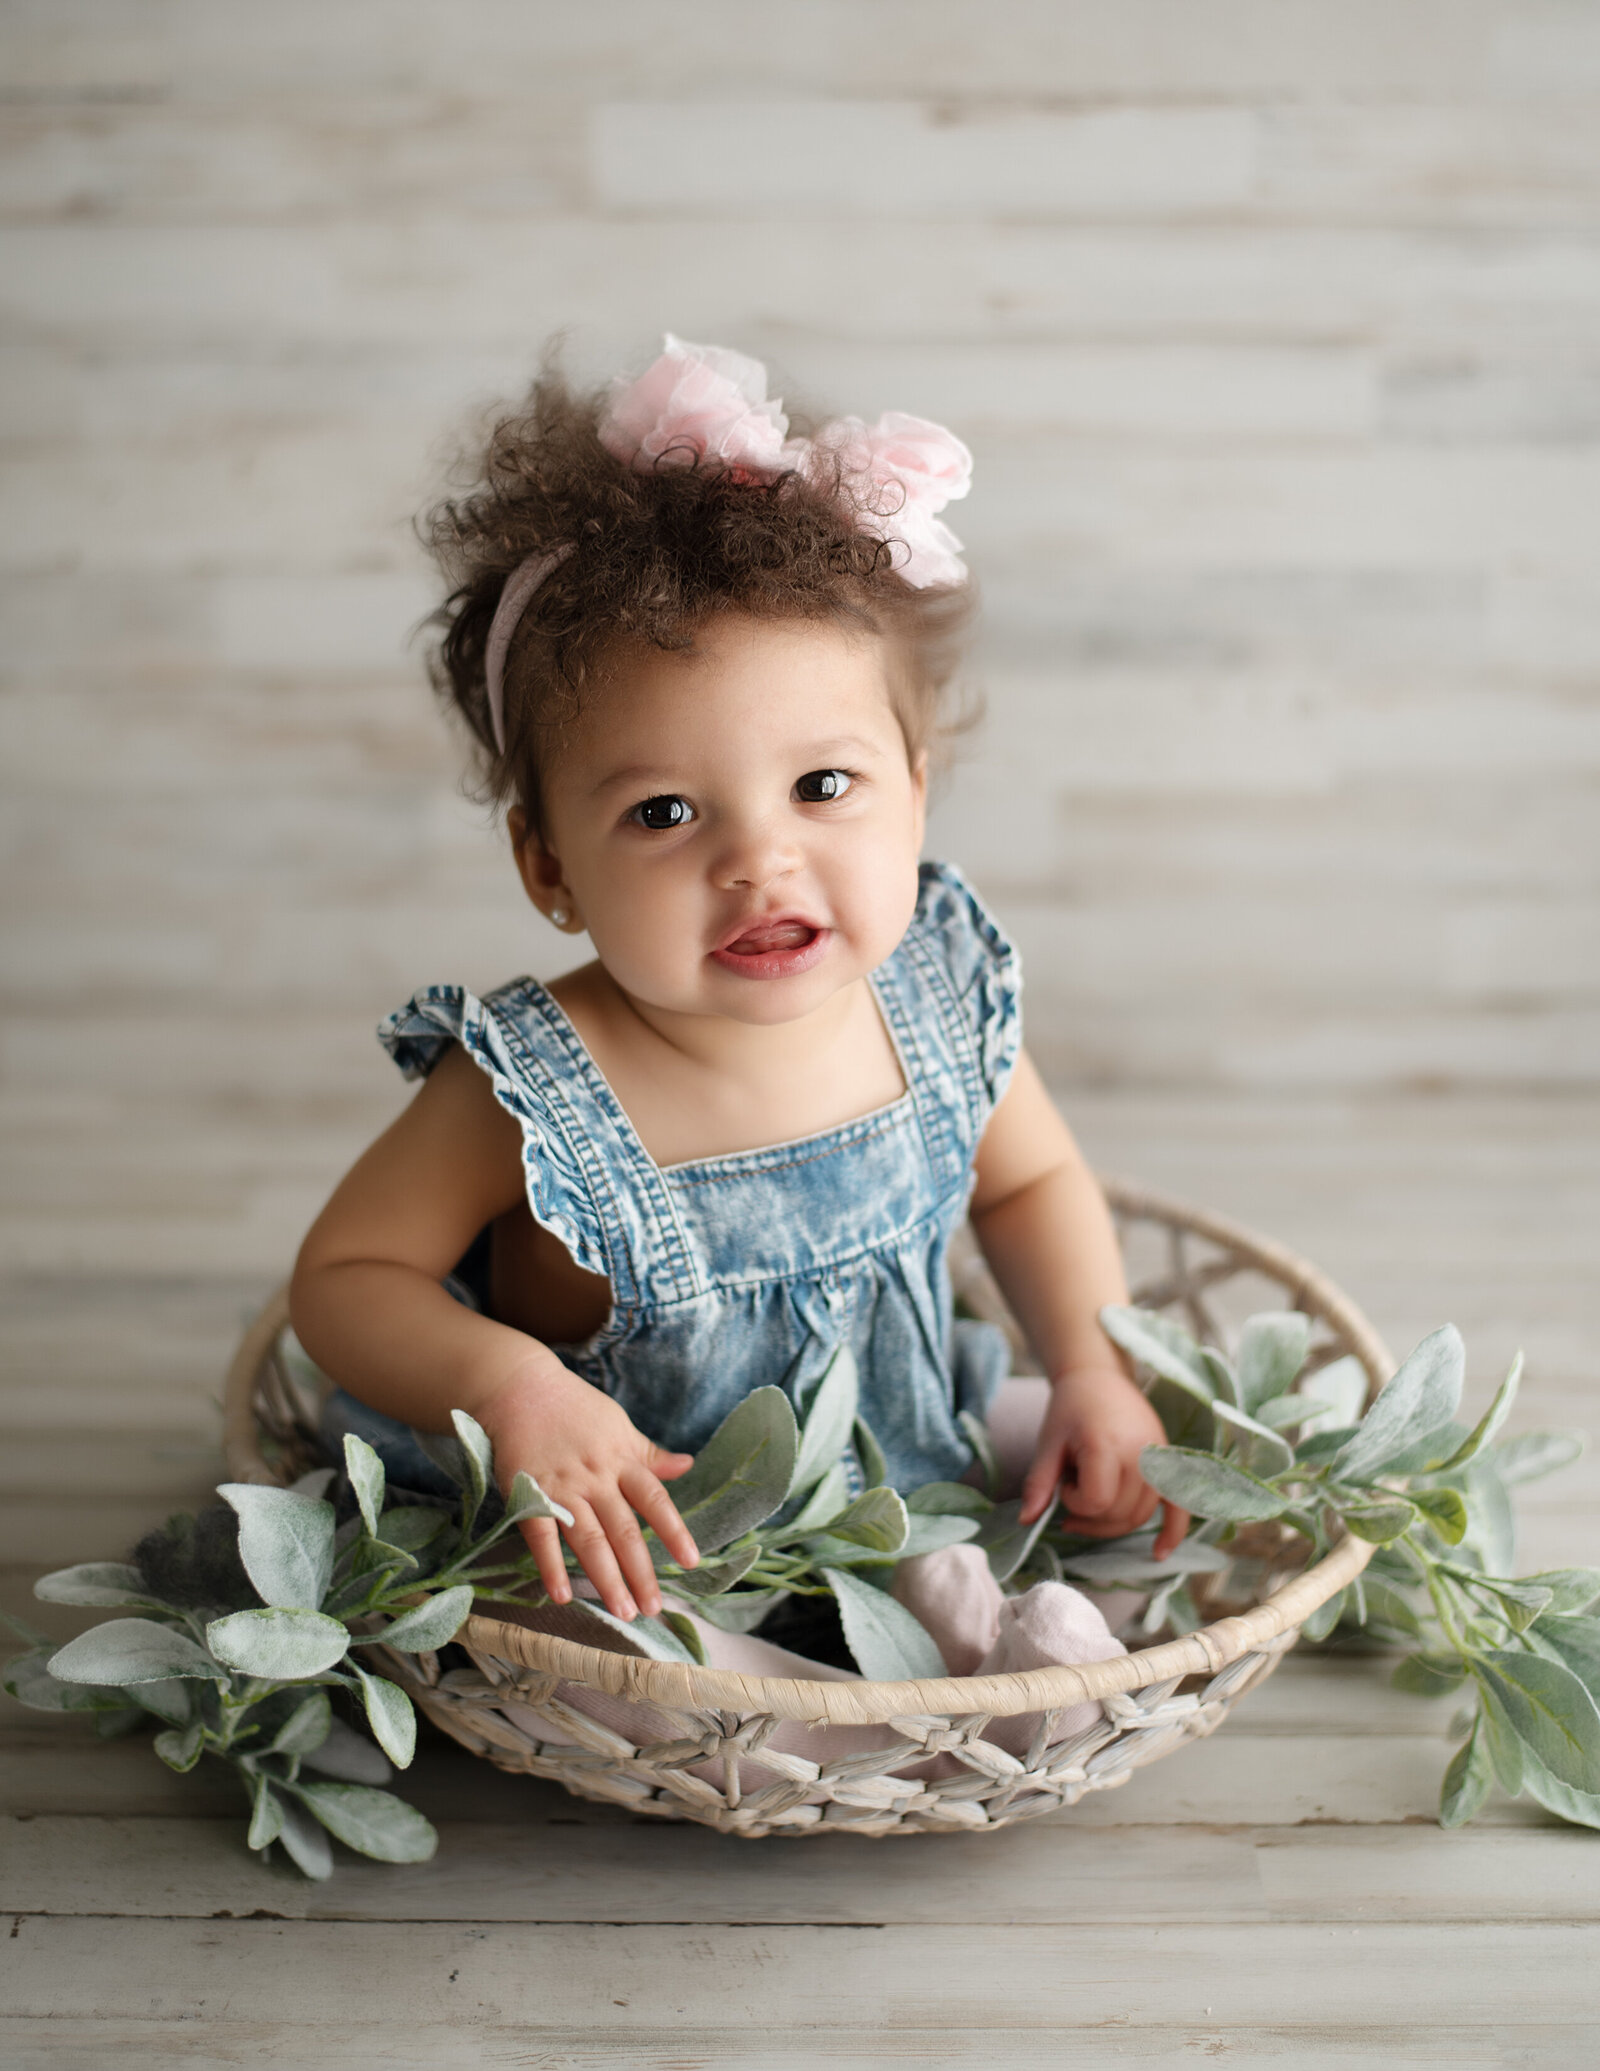 baby in a basket photo ideas